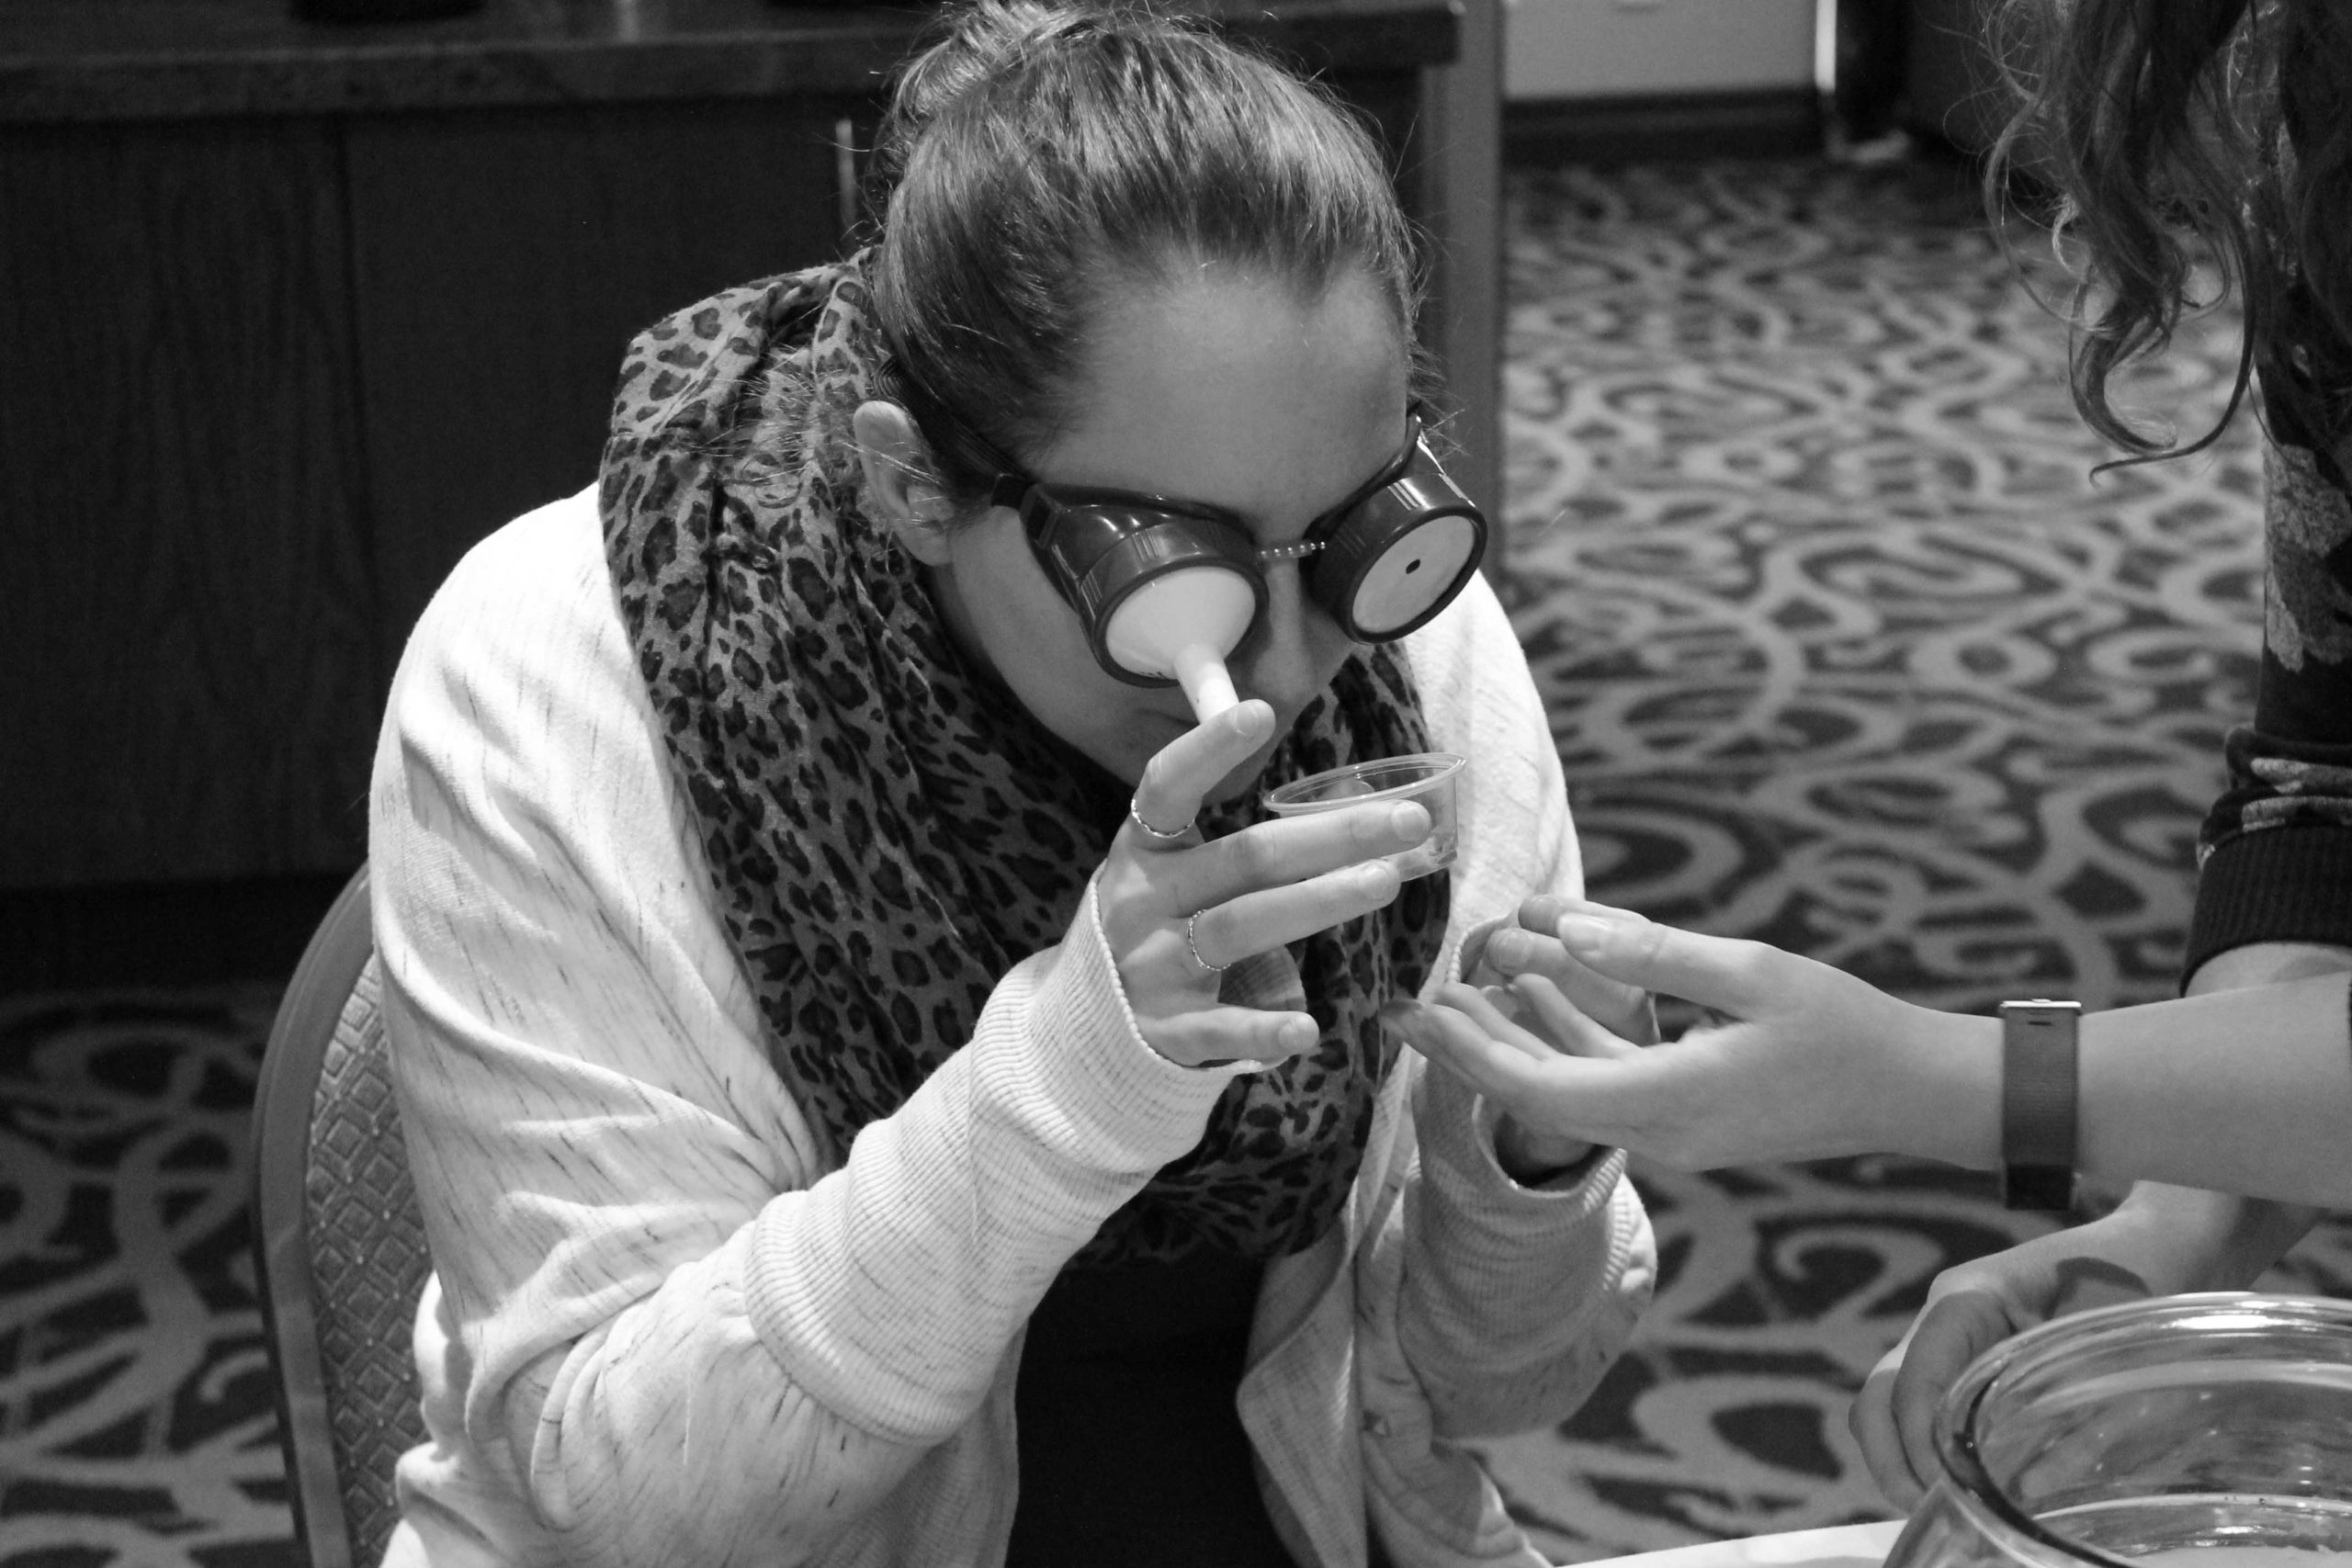 A black and white photo of a young woman participating in a simulation training exercise. She is wearing simulation goggles while examining an object. The goggles help her to understand the functional impact of visual impairment or low vision.